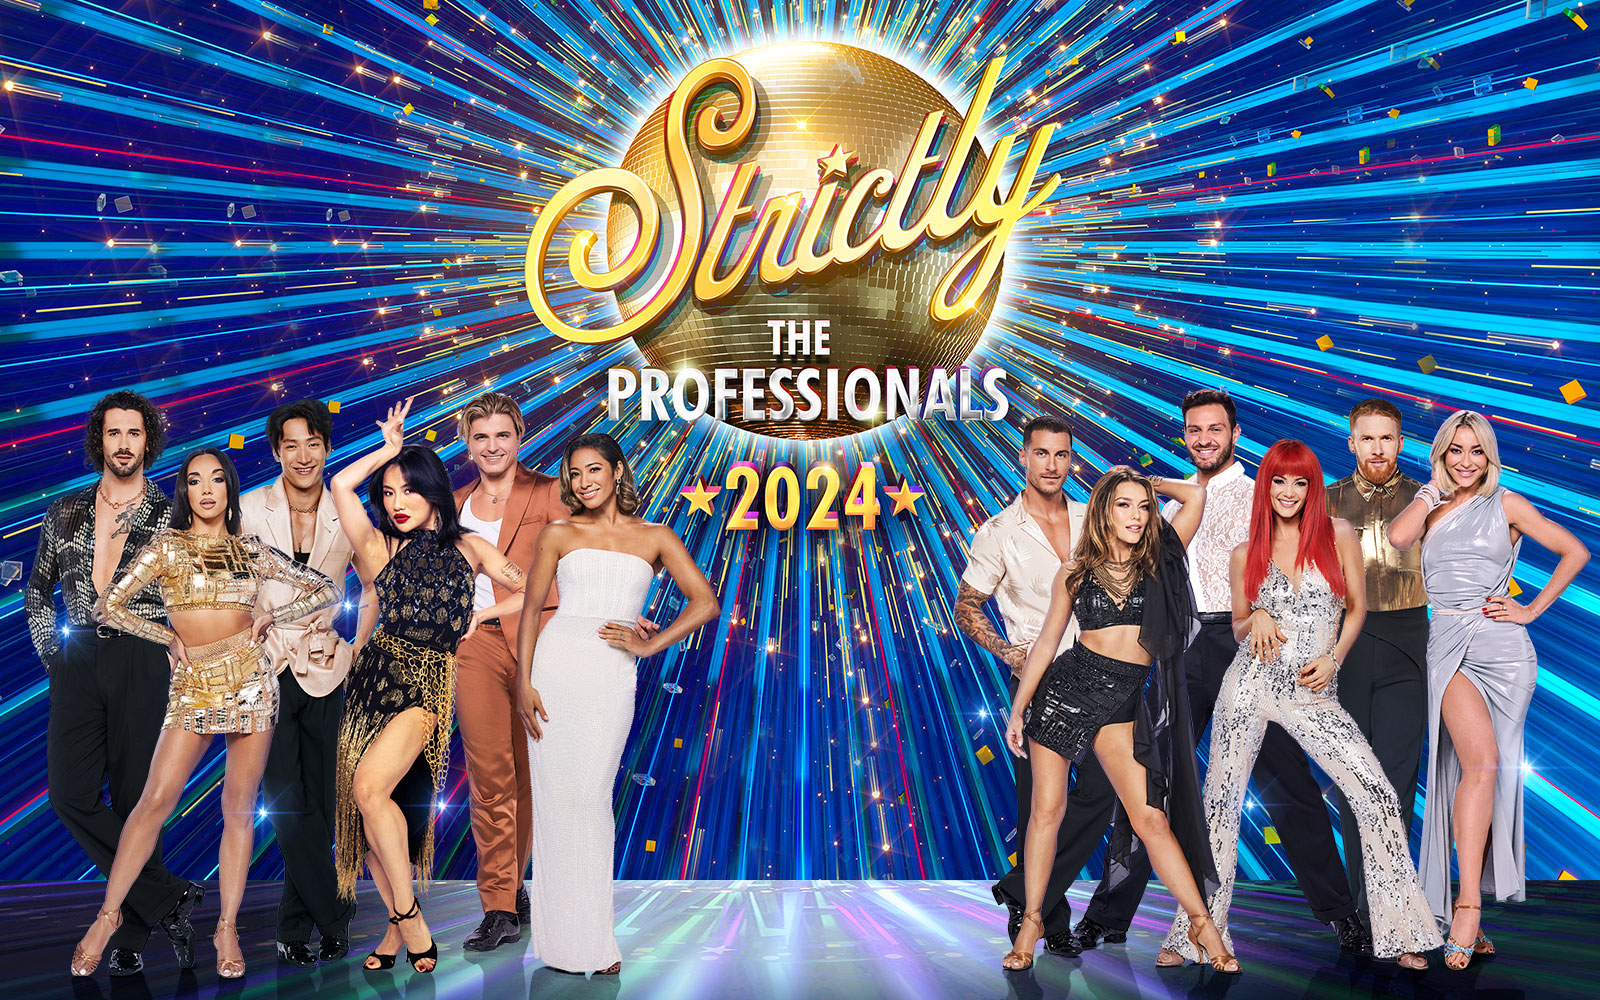 strictly professionals tour 2022